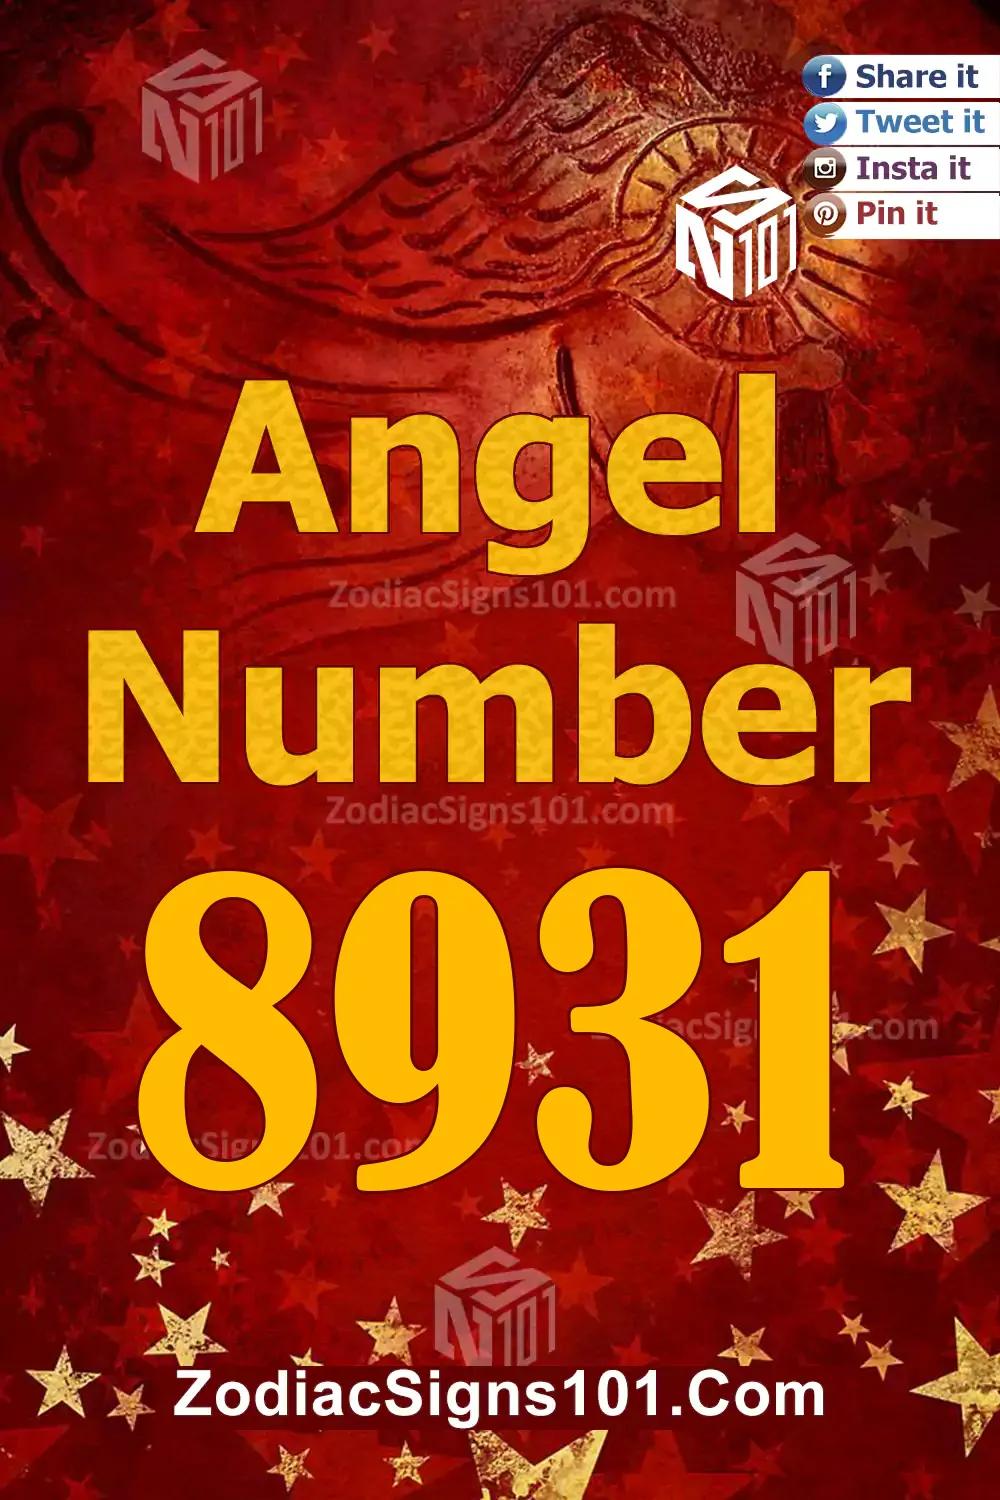 8931 Angel Number Meaning